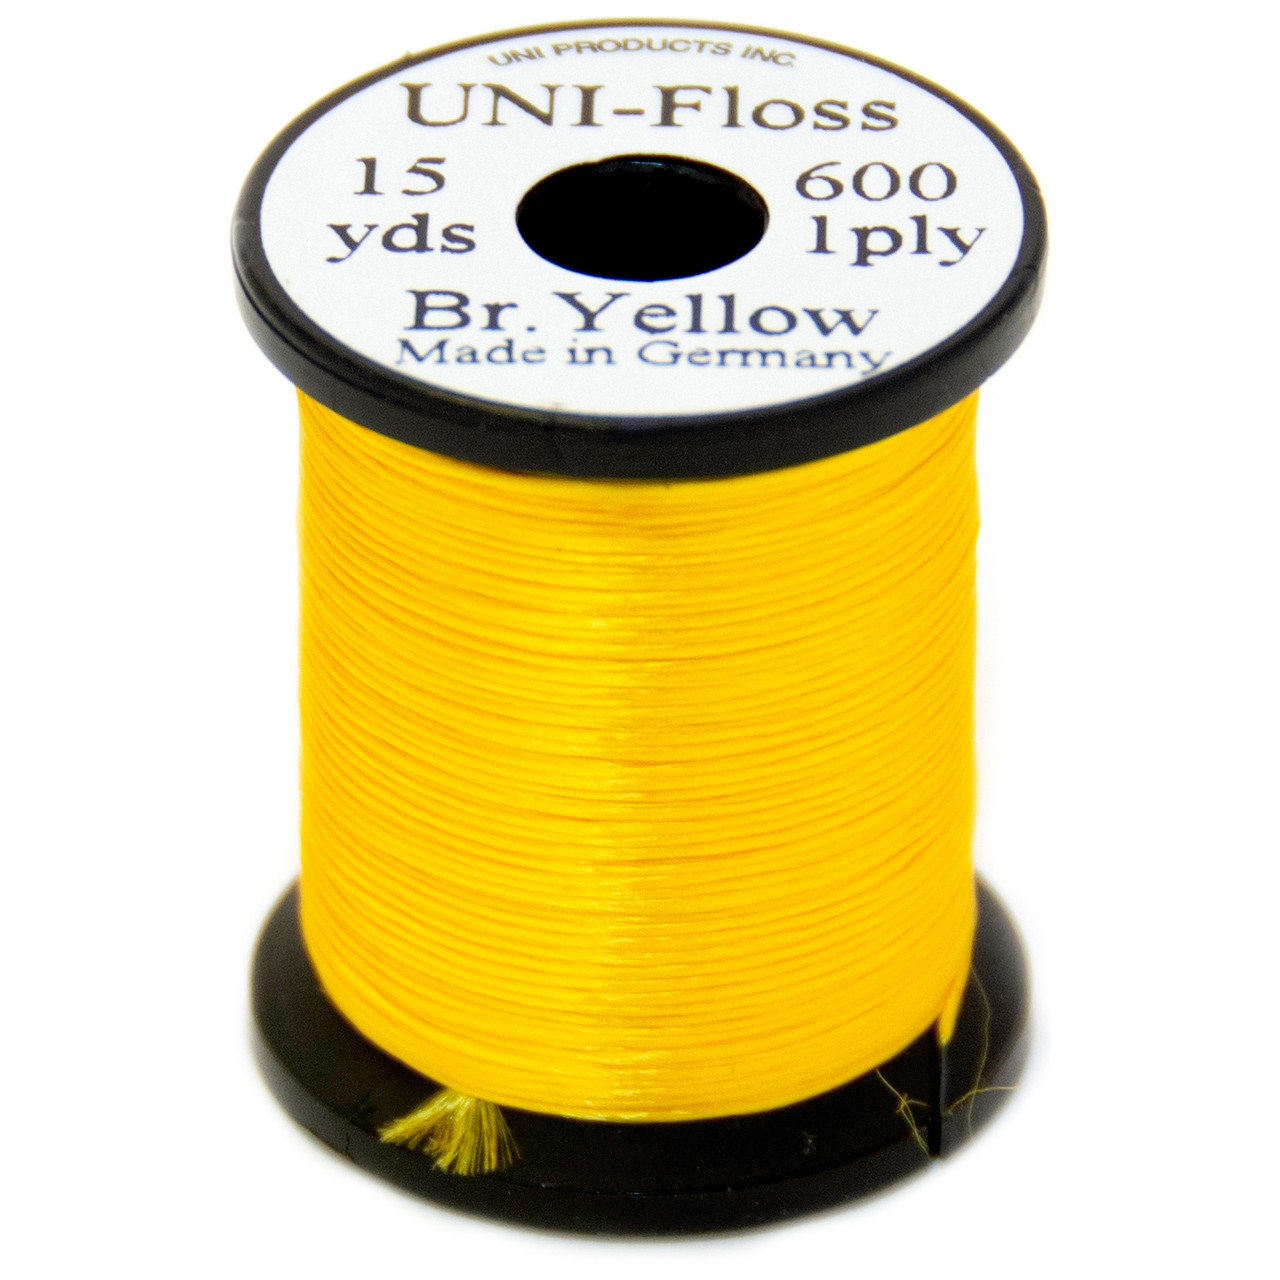 UNI FLOSS ASSORTED COLOURS 15 YARD REELS FLY TYING MATERIALS FROM FLYMAKERS 